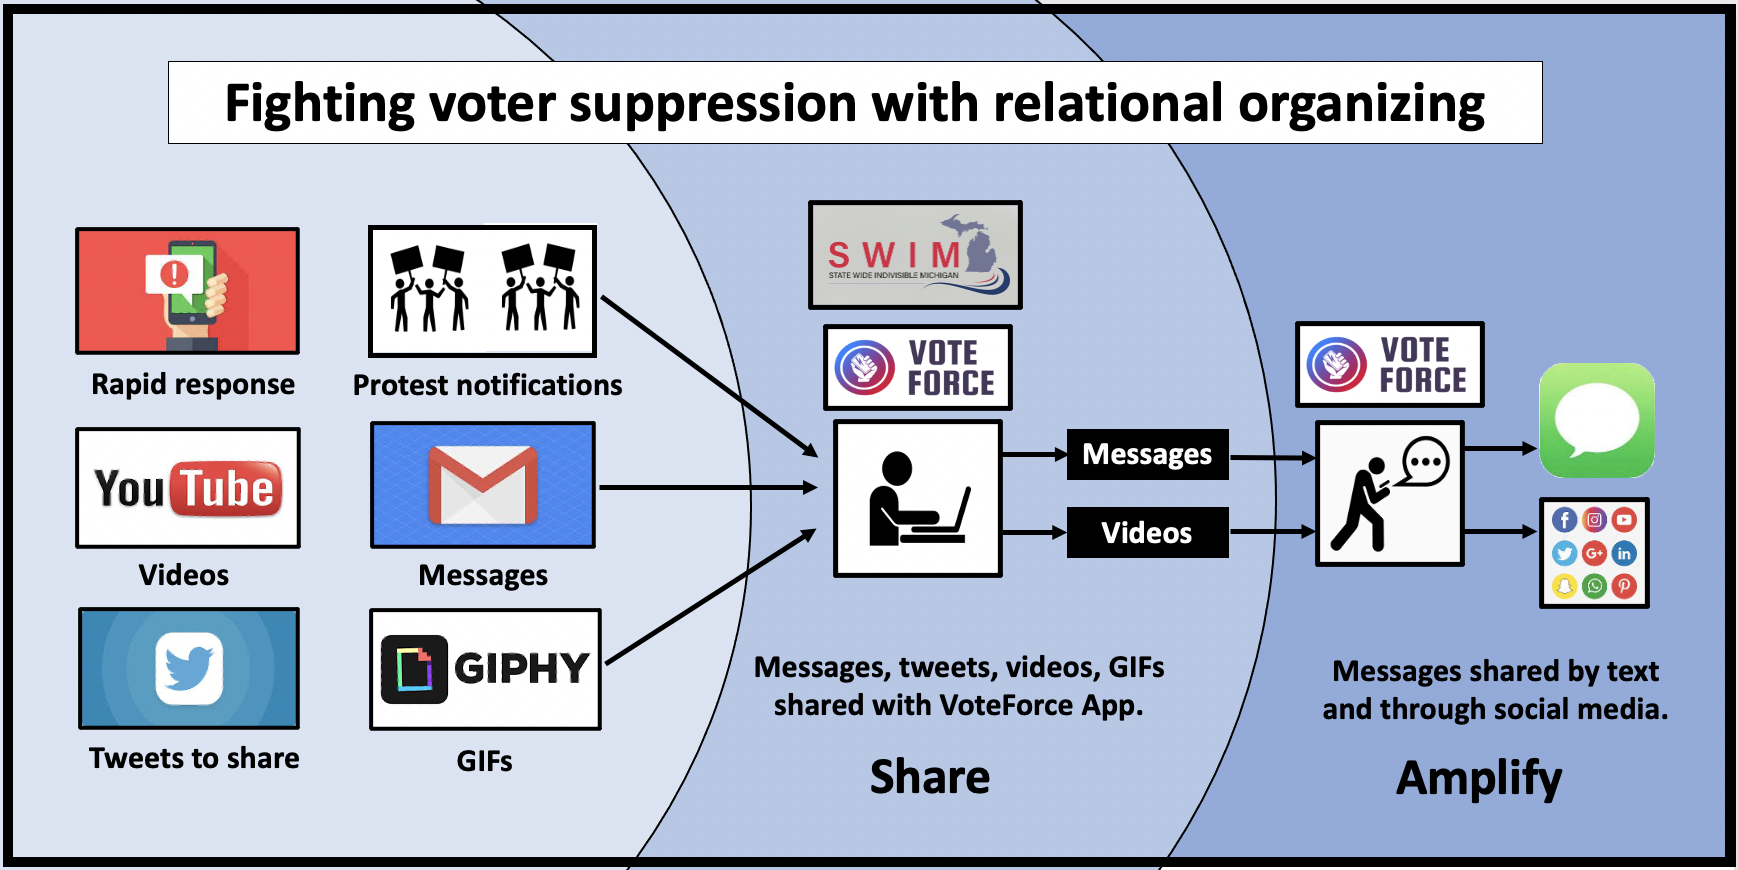 Relational organizing helps with rapid response and mobilization to protest voter suppression.